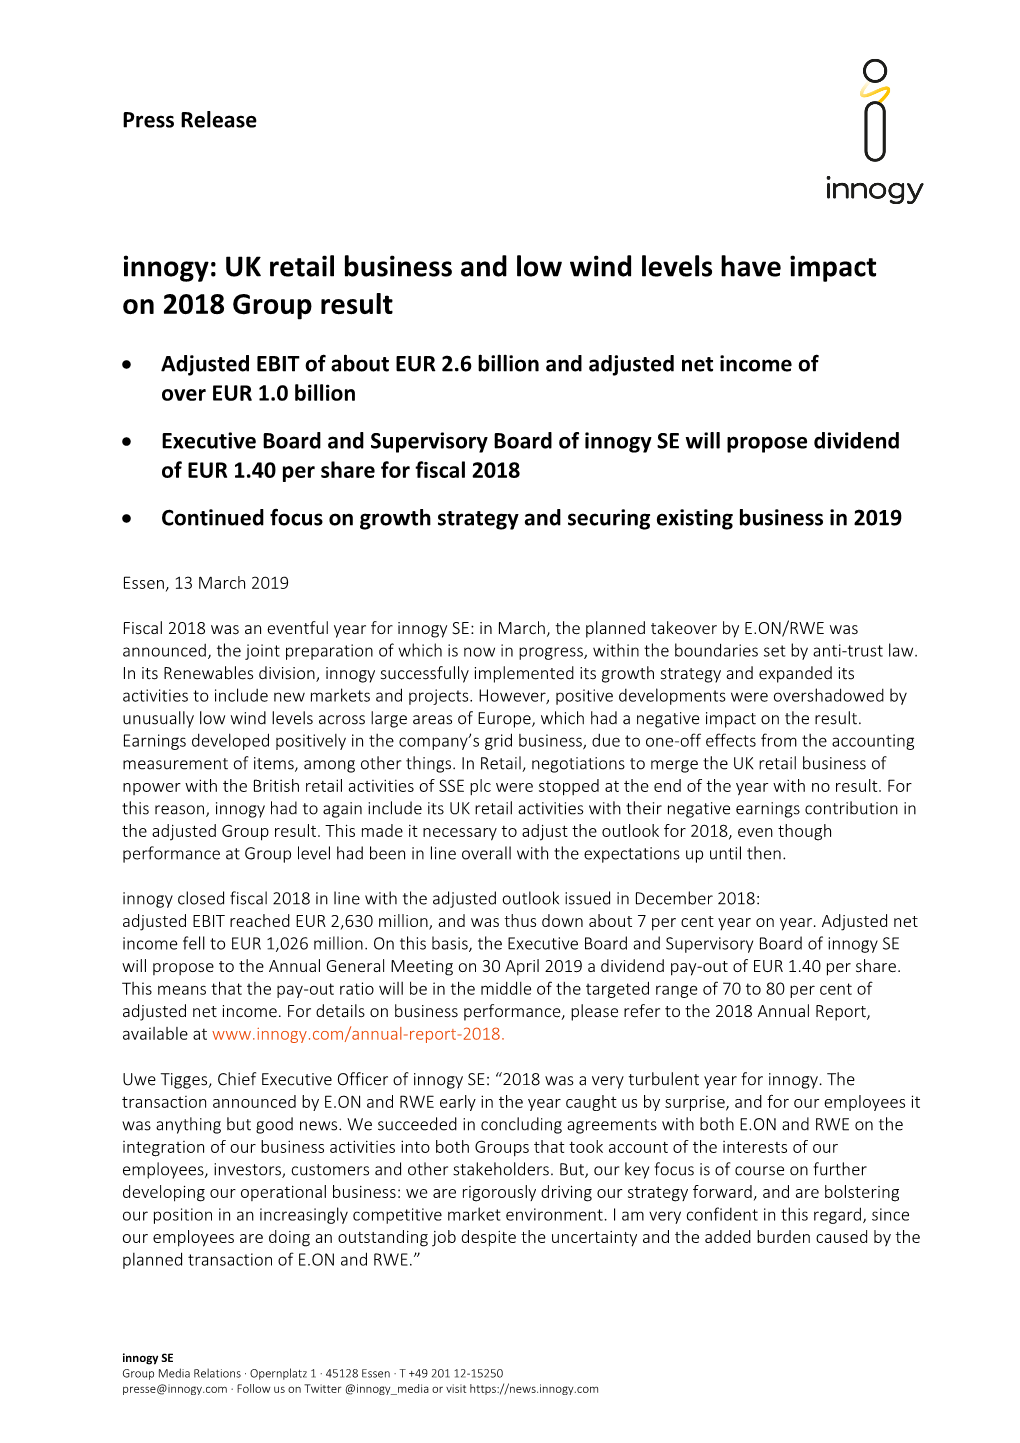 Innogy: UK Retail Business and Low Wind Levels Have Impact on 2018 Group Result